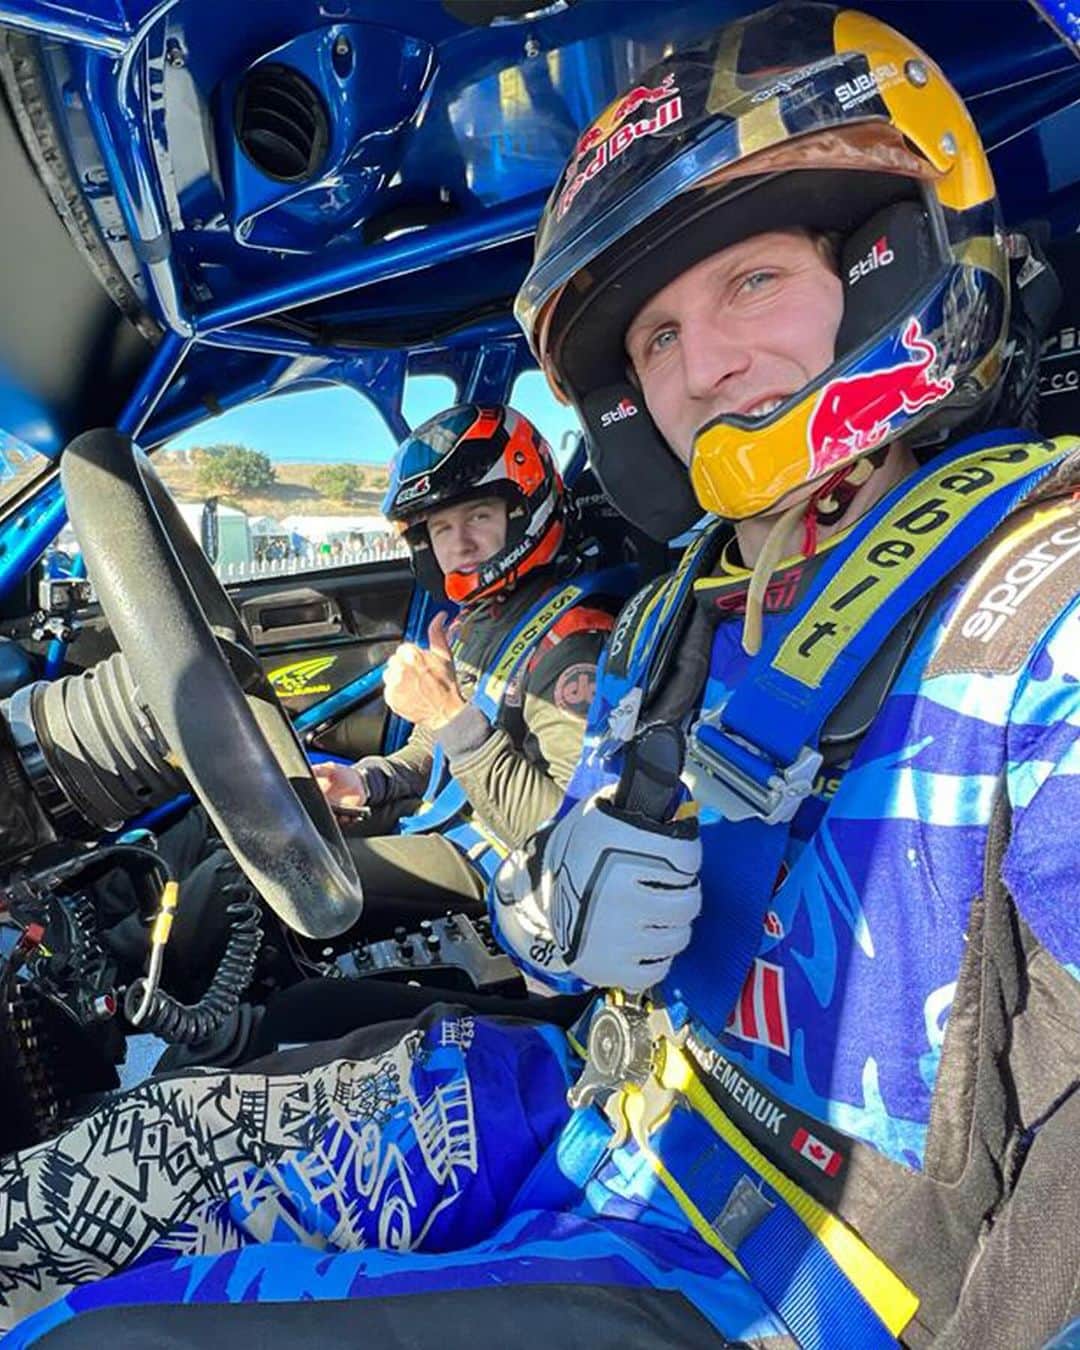 Subaru Rally Team USAのインスタグラム：「STAY TUNED! For the full story of a McRae-Subaru reunion is coming at you. Even better... find out how two-time ARA champ Brandon Semenuk fared in a Tommi Mäkinen Subaru Impreza WRC02. It’s all coming at you on DirtFish.com  #dirtfish #rally #rallycar #velocityinvitational #subarumotorsportsusa」